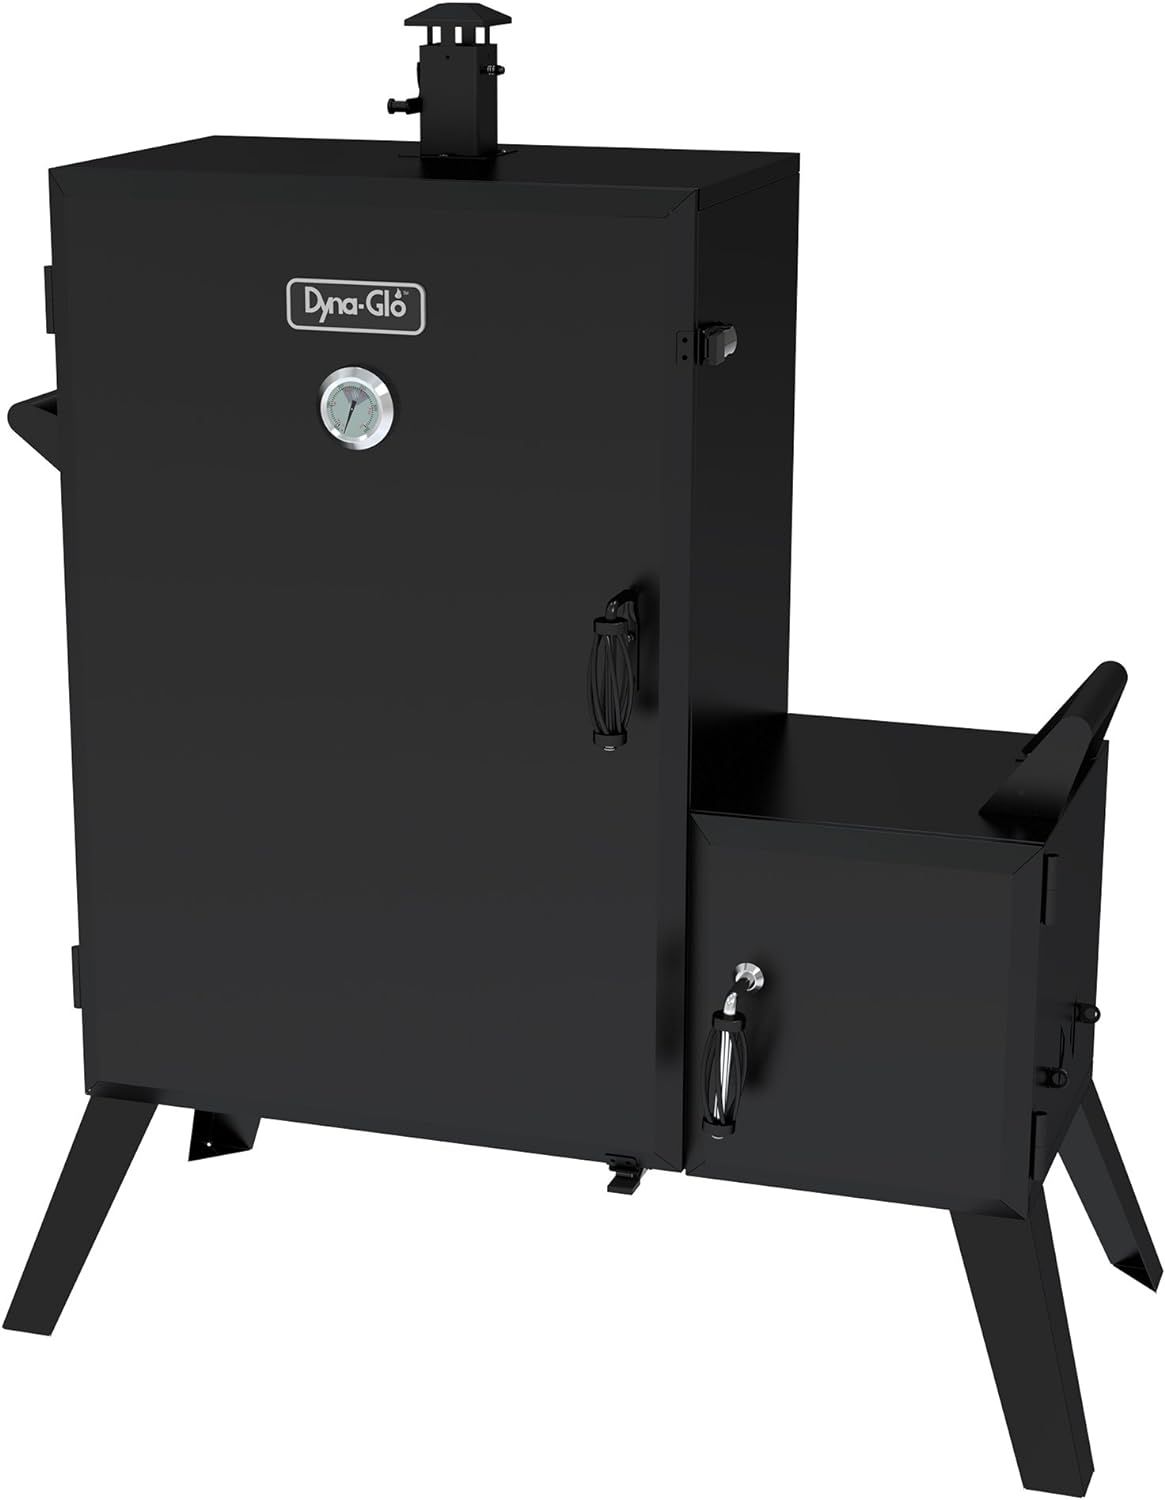 Dyna-Glo Vertical Offset Charcoal Smoker Logo